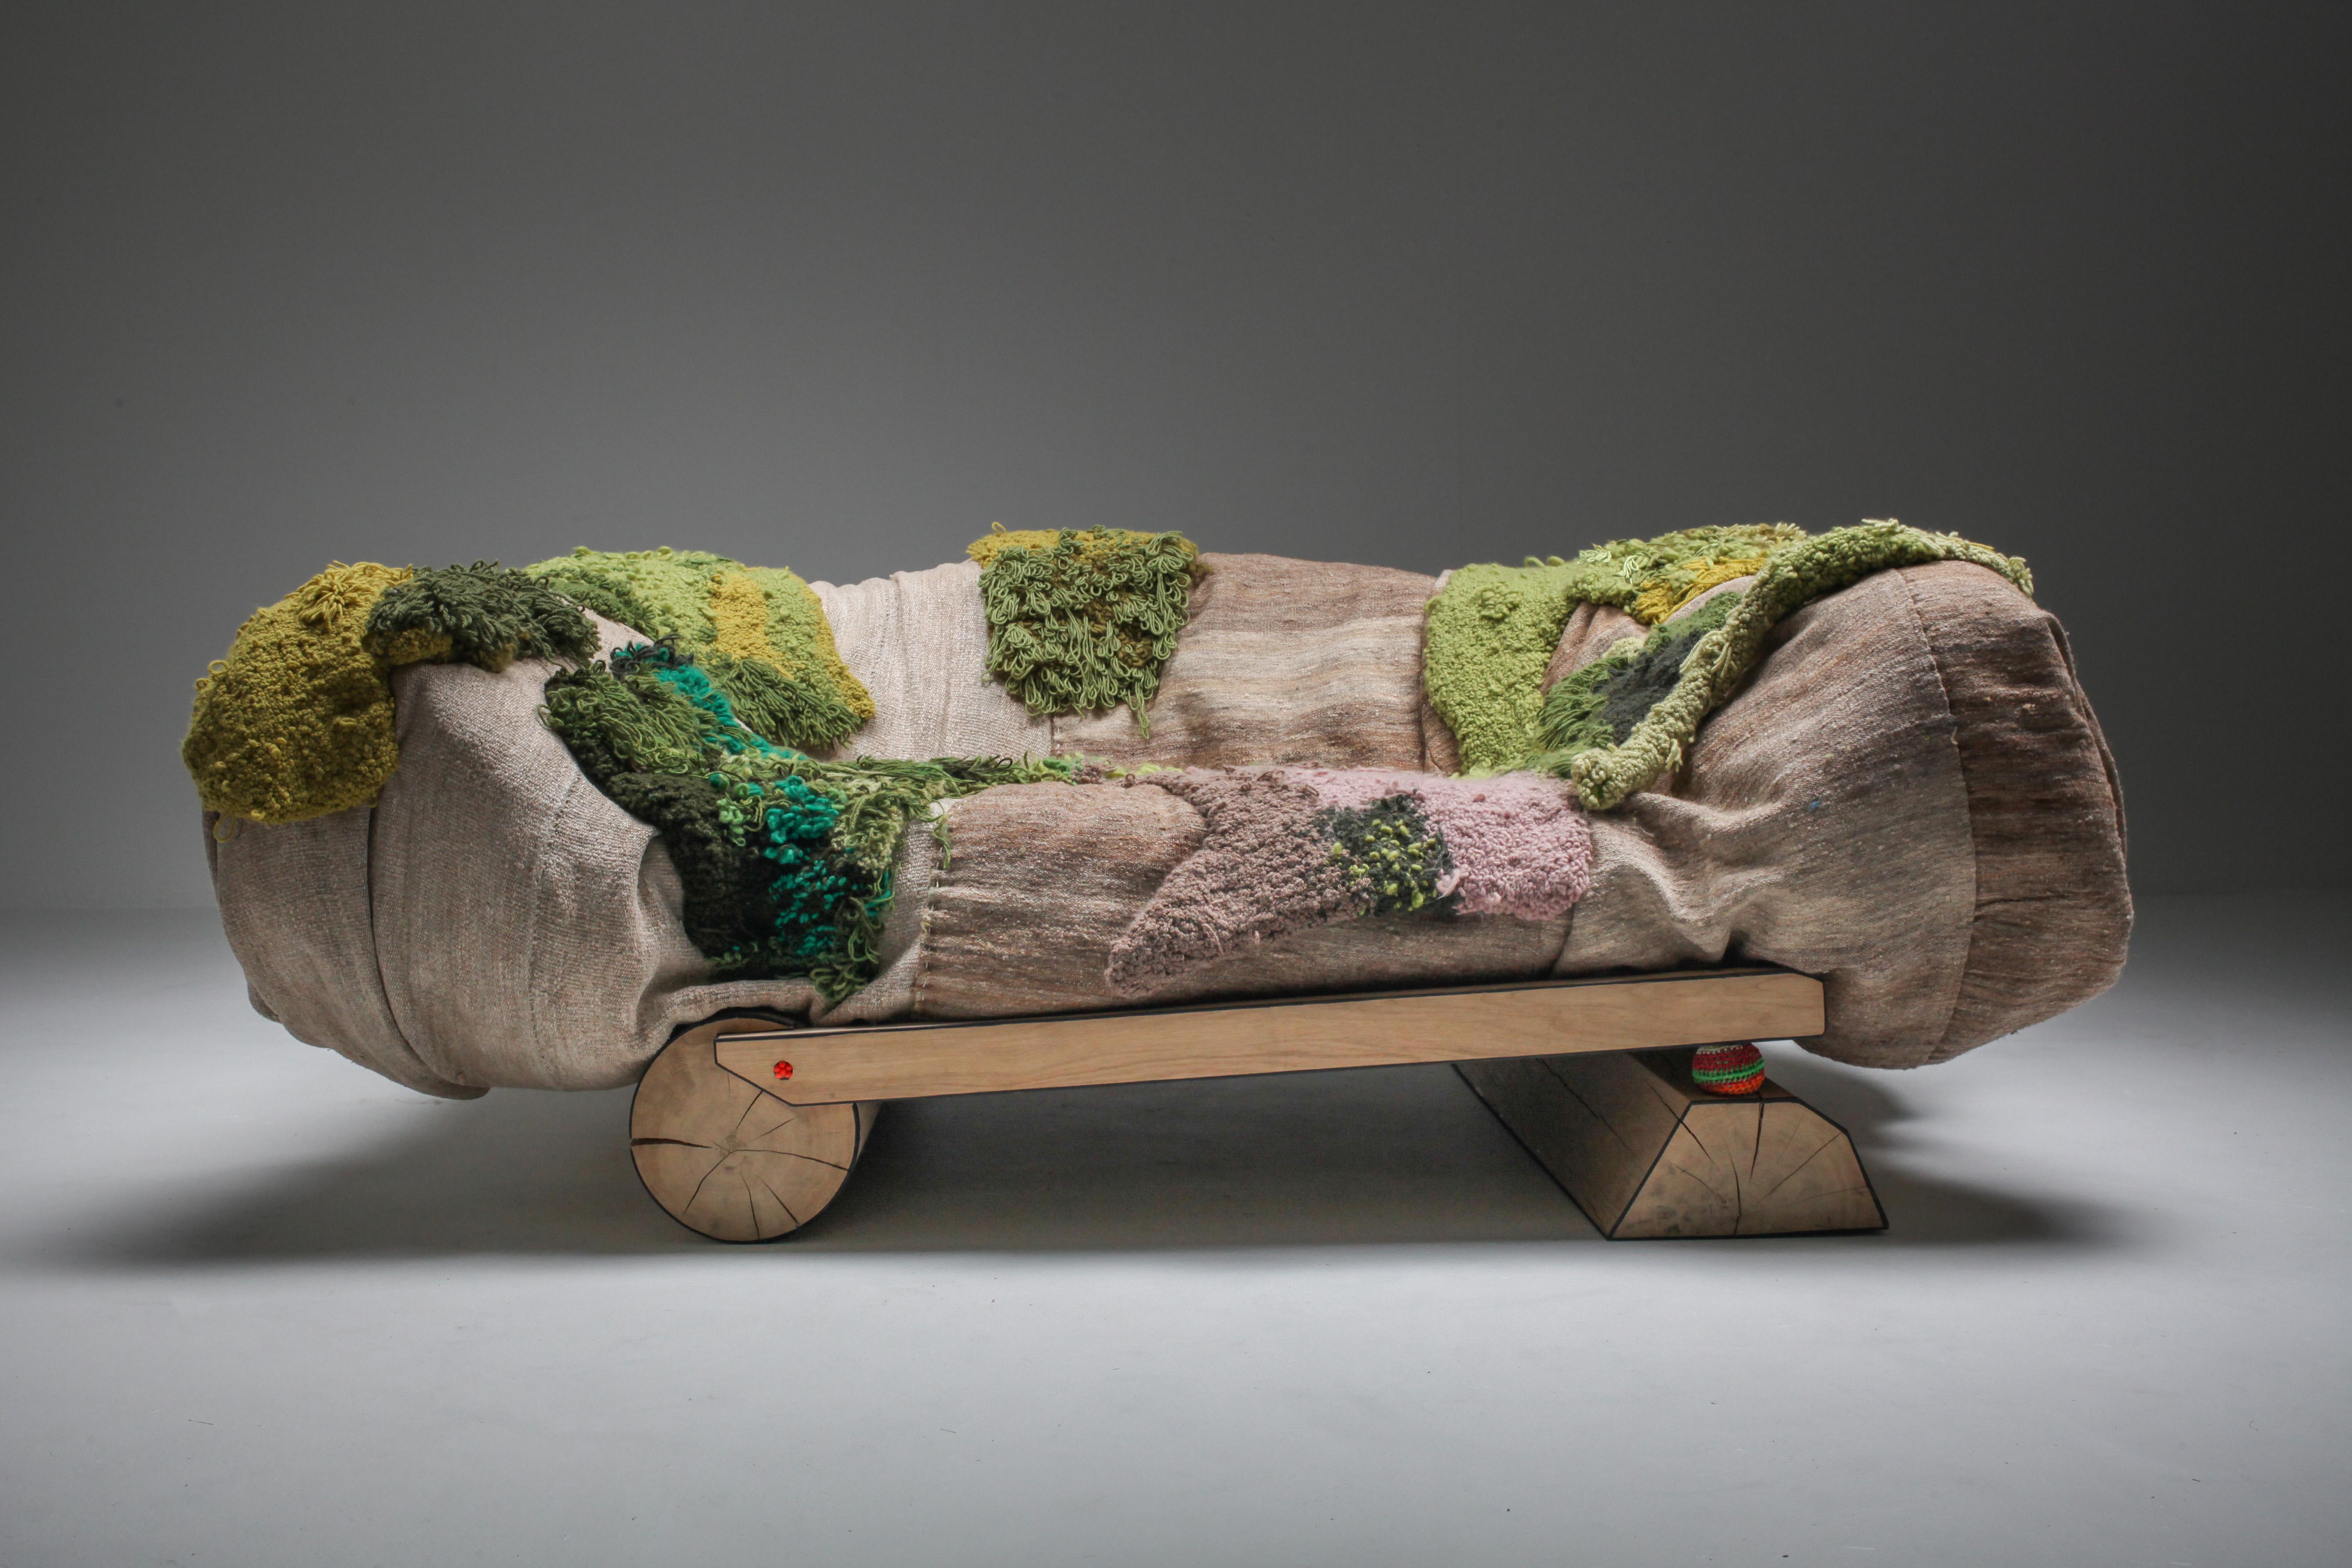 This functional art sofa echoes the trucks that transport the grain in Rajasthan, the canvas is a weaving of raw wool from the mountainous regions of Turkey, the tapestry was created in a collaboration with French artist Olivia Babel and features